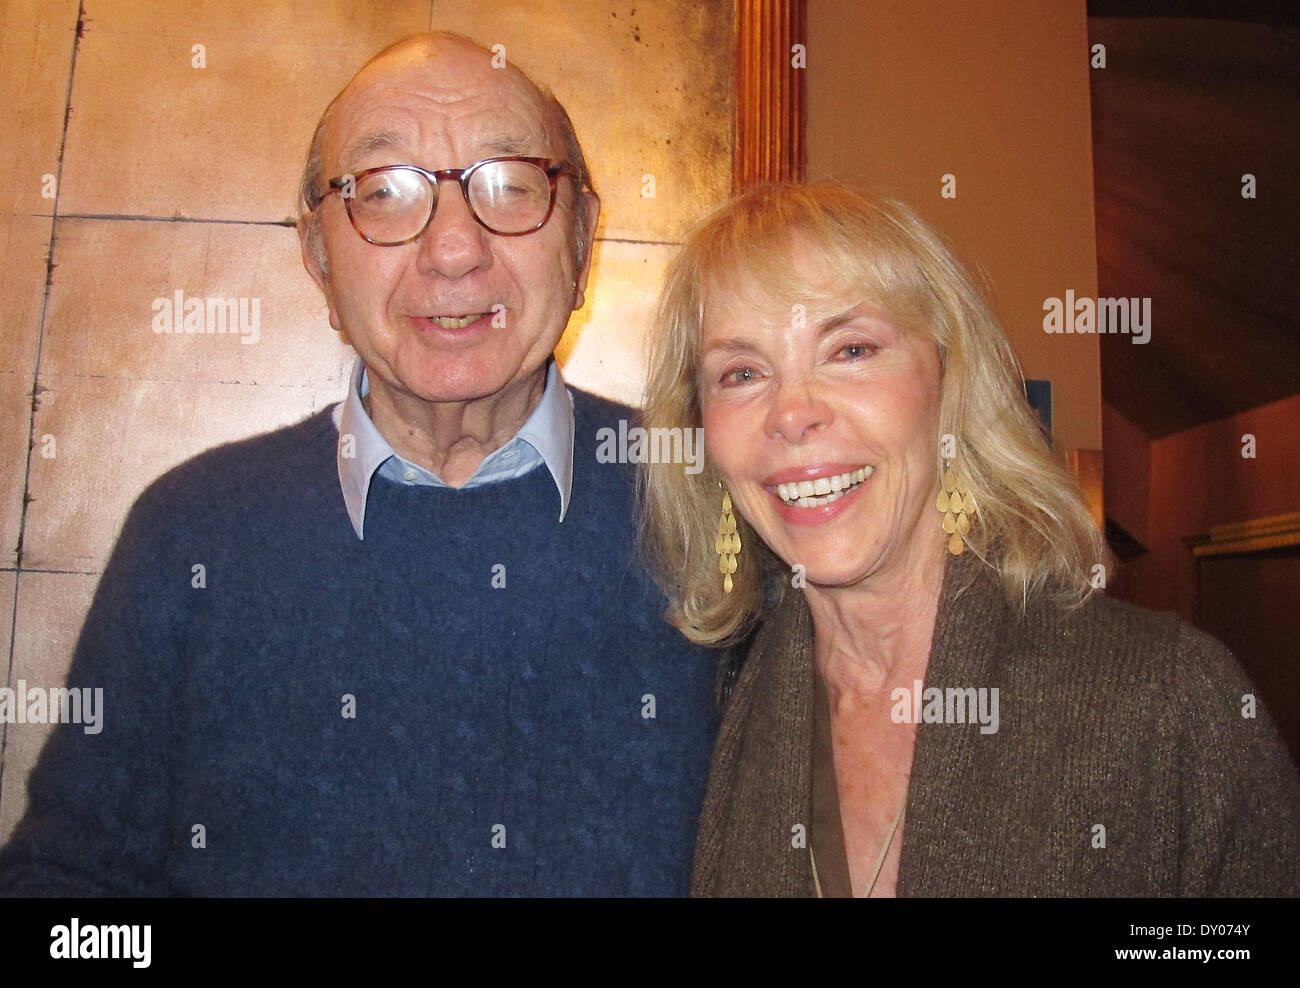 Neil Simon and his wife Elaine attended the Broadway show 'A Christmas Story The Musical' on Broadway at the Lunt-Fontanne Theatre Featuring: Neil Simon,Elaine Simon Where: New York City NY United States When: 03 Dec 2012 Stock Photo